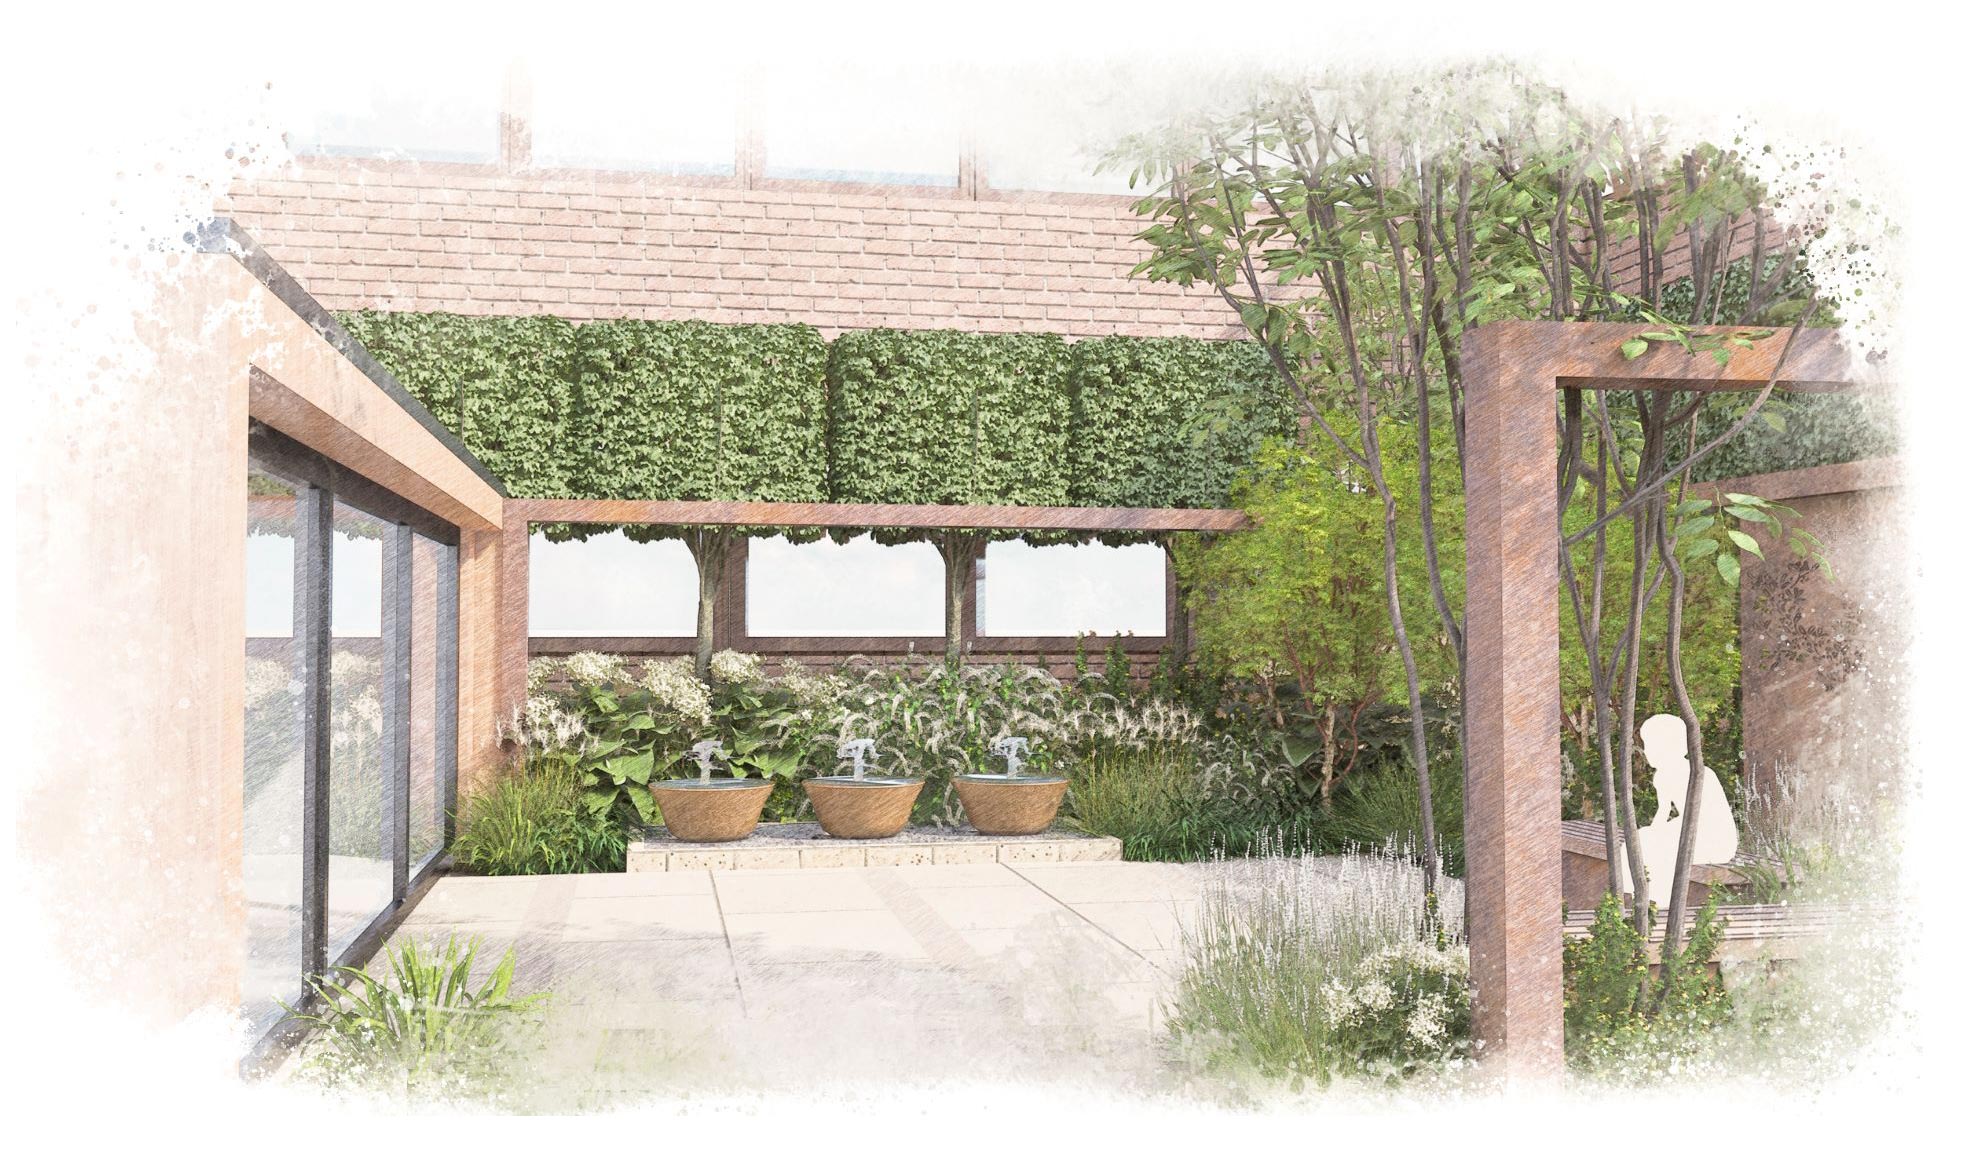 Visualisation of The Eternal Garden for palliative care patients at St Peter's Hospital, Chertsey. Rae Wilkinson Design